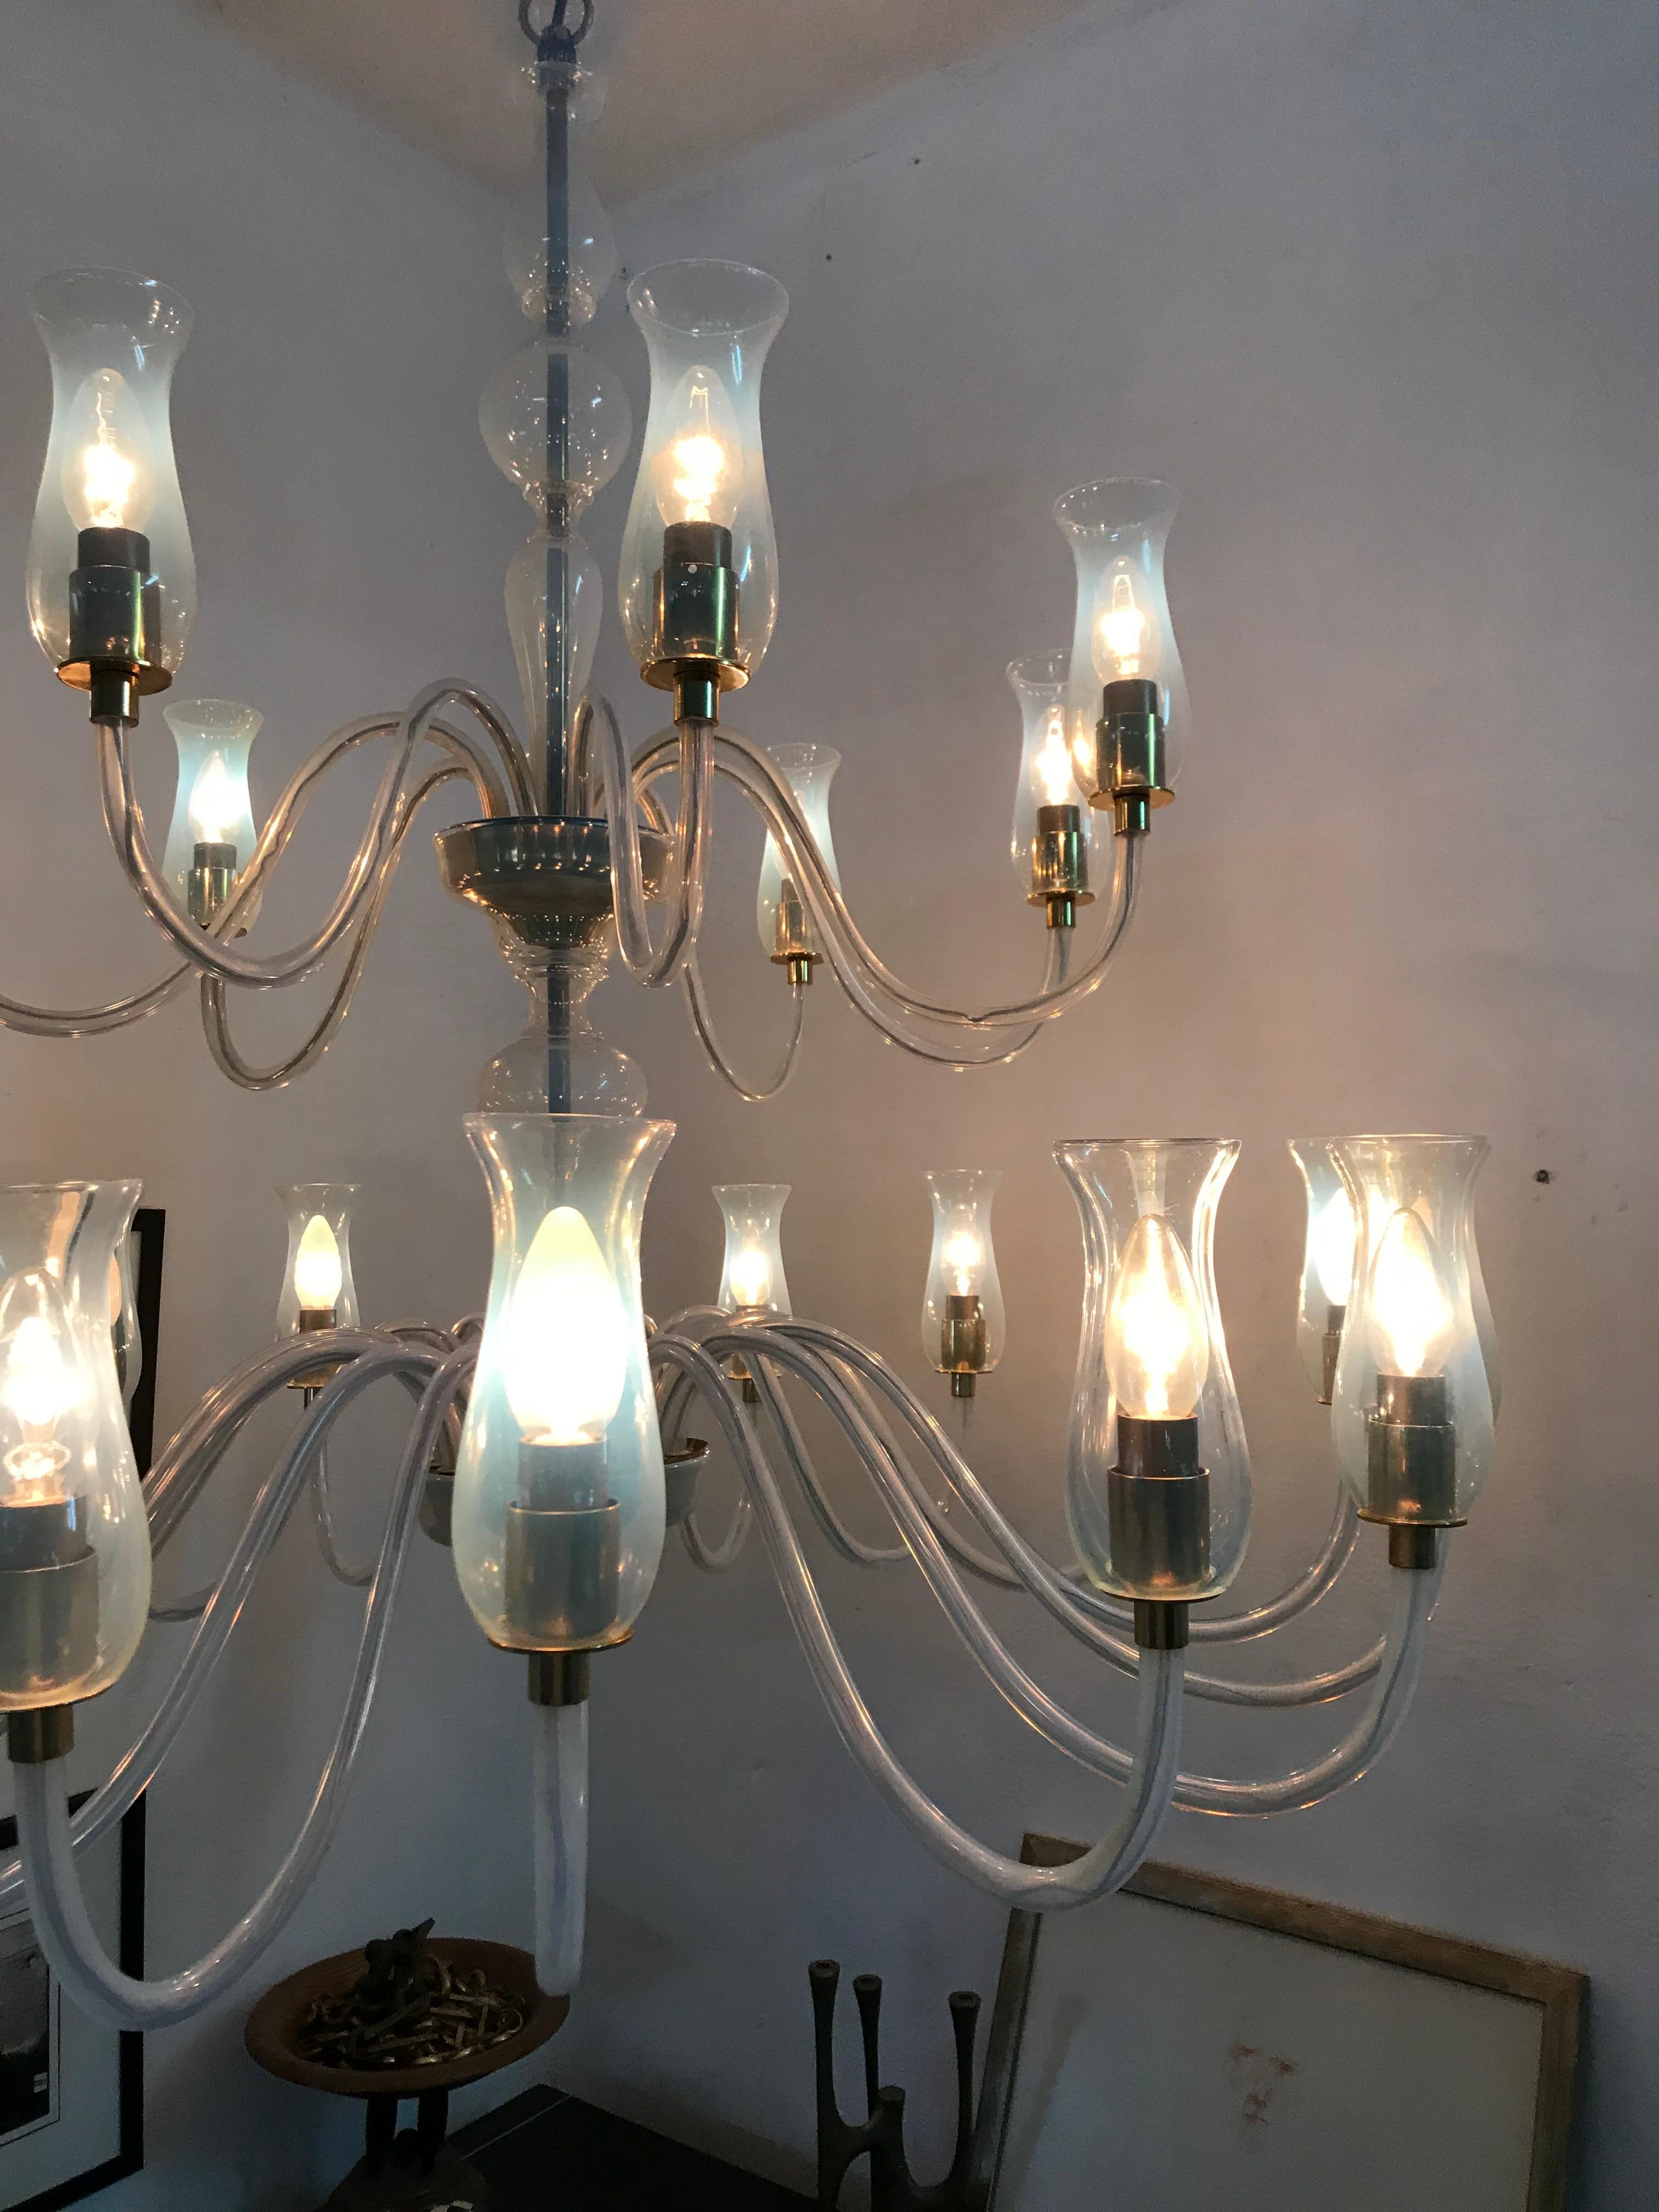 24-Light Mid Century Modern Chandelier by Cenedese in Murano Glass, circa 1970 For Sale 2